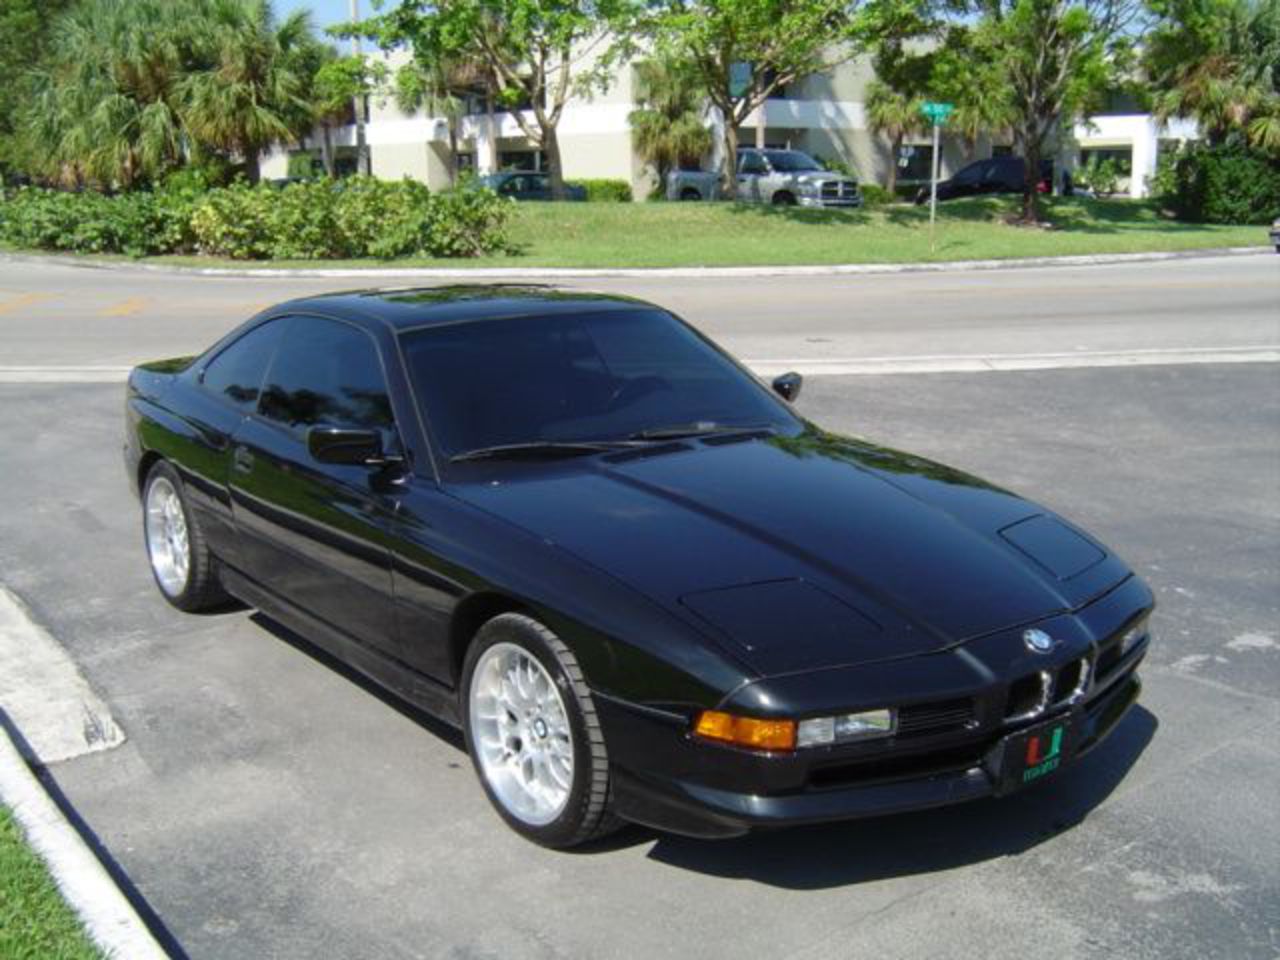 How Much Is A Bmw 850I Worth?